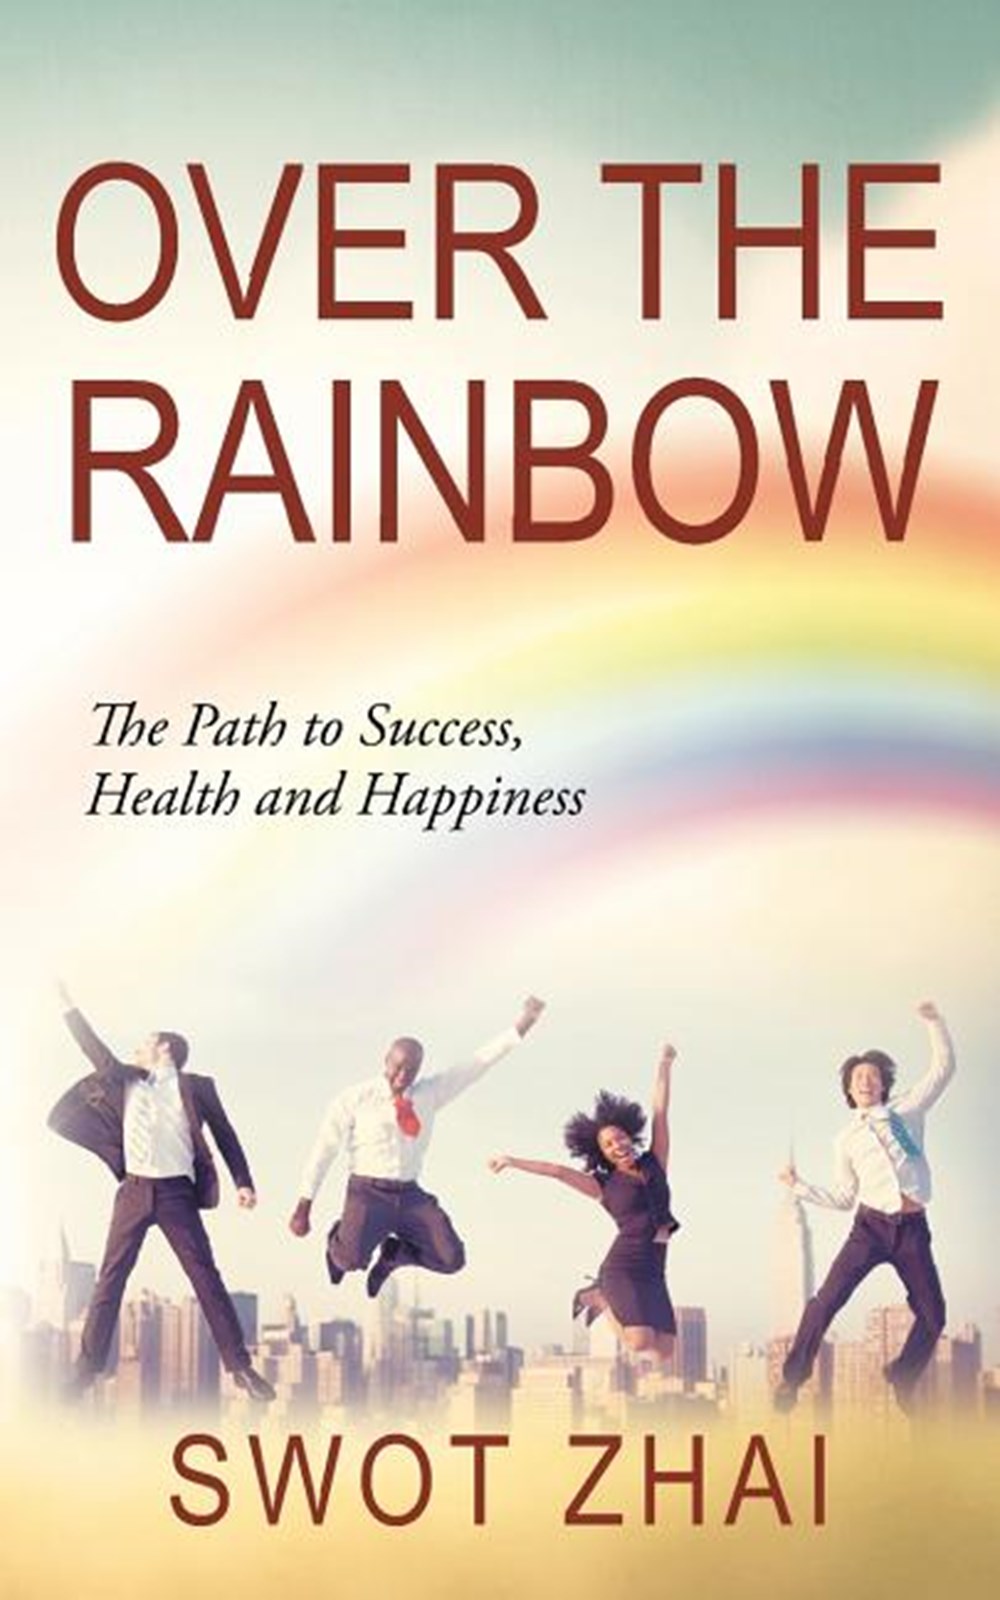 Over the Rainbow The Path to Success, Health and Happiness